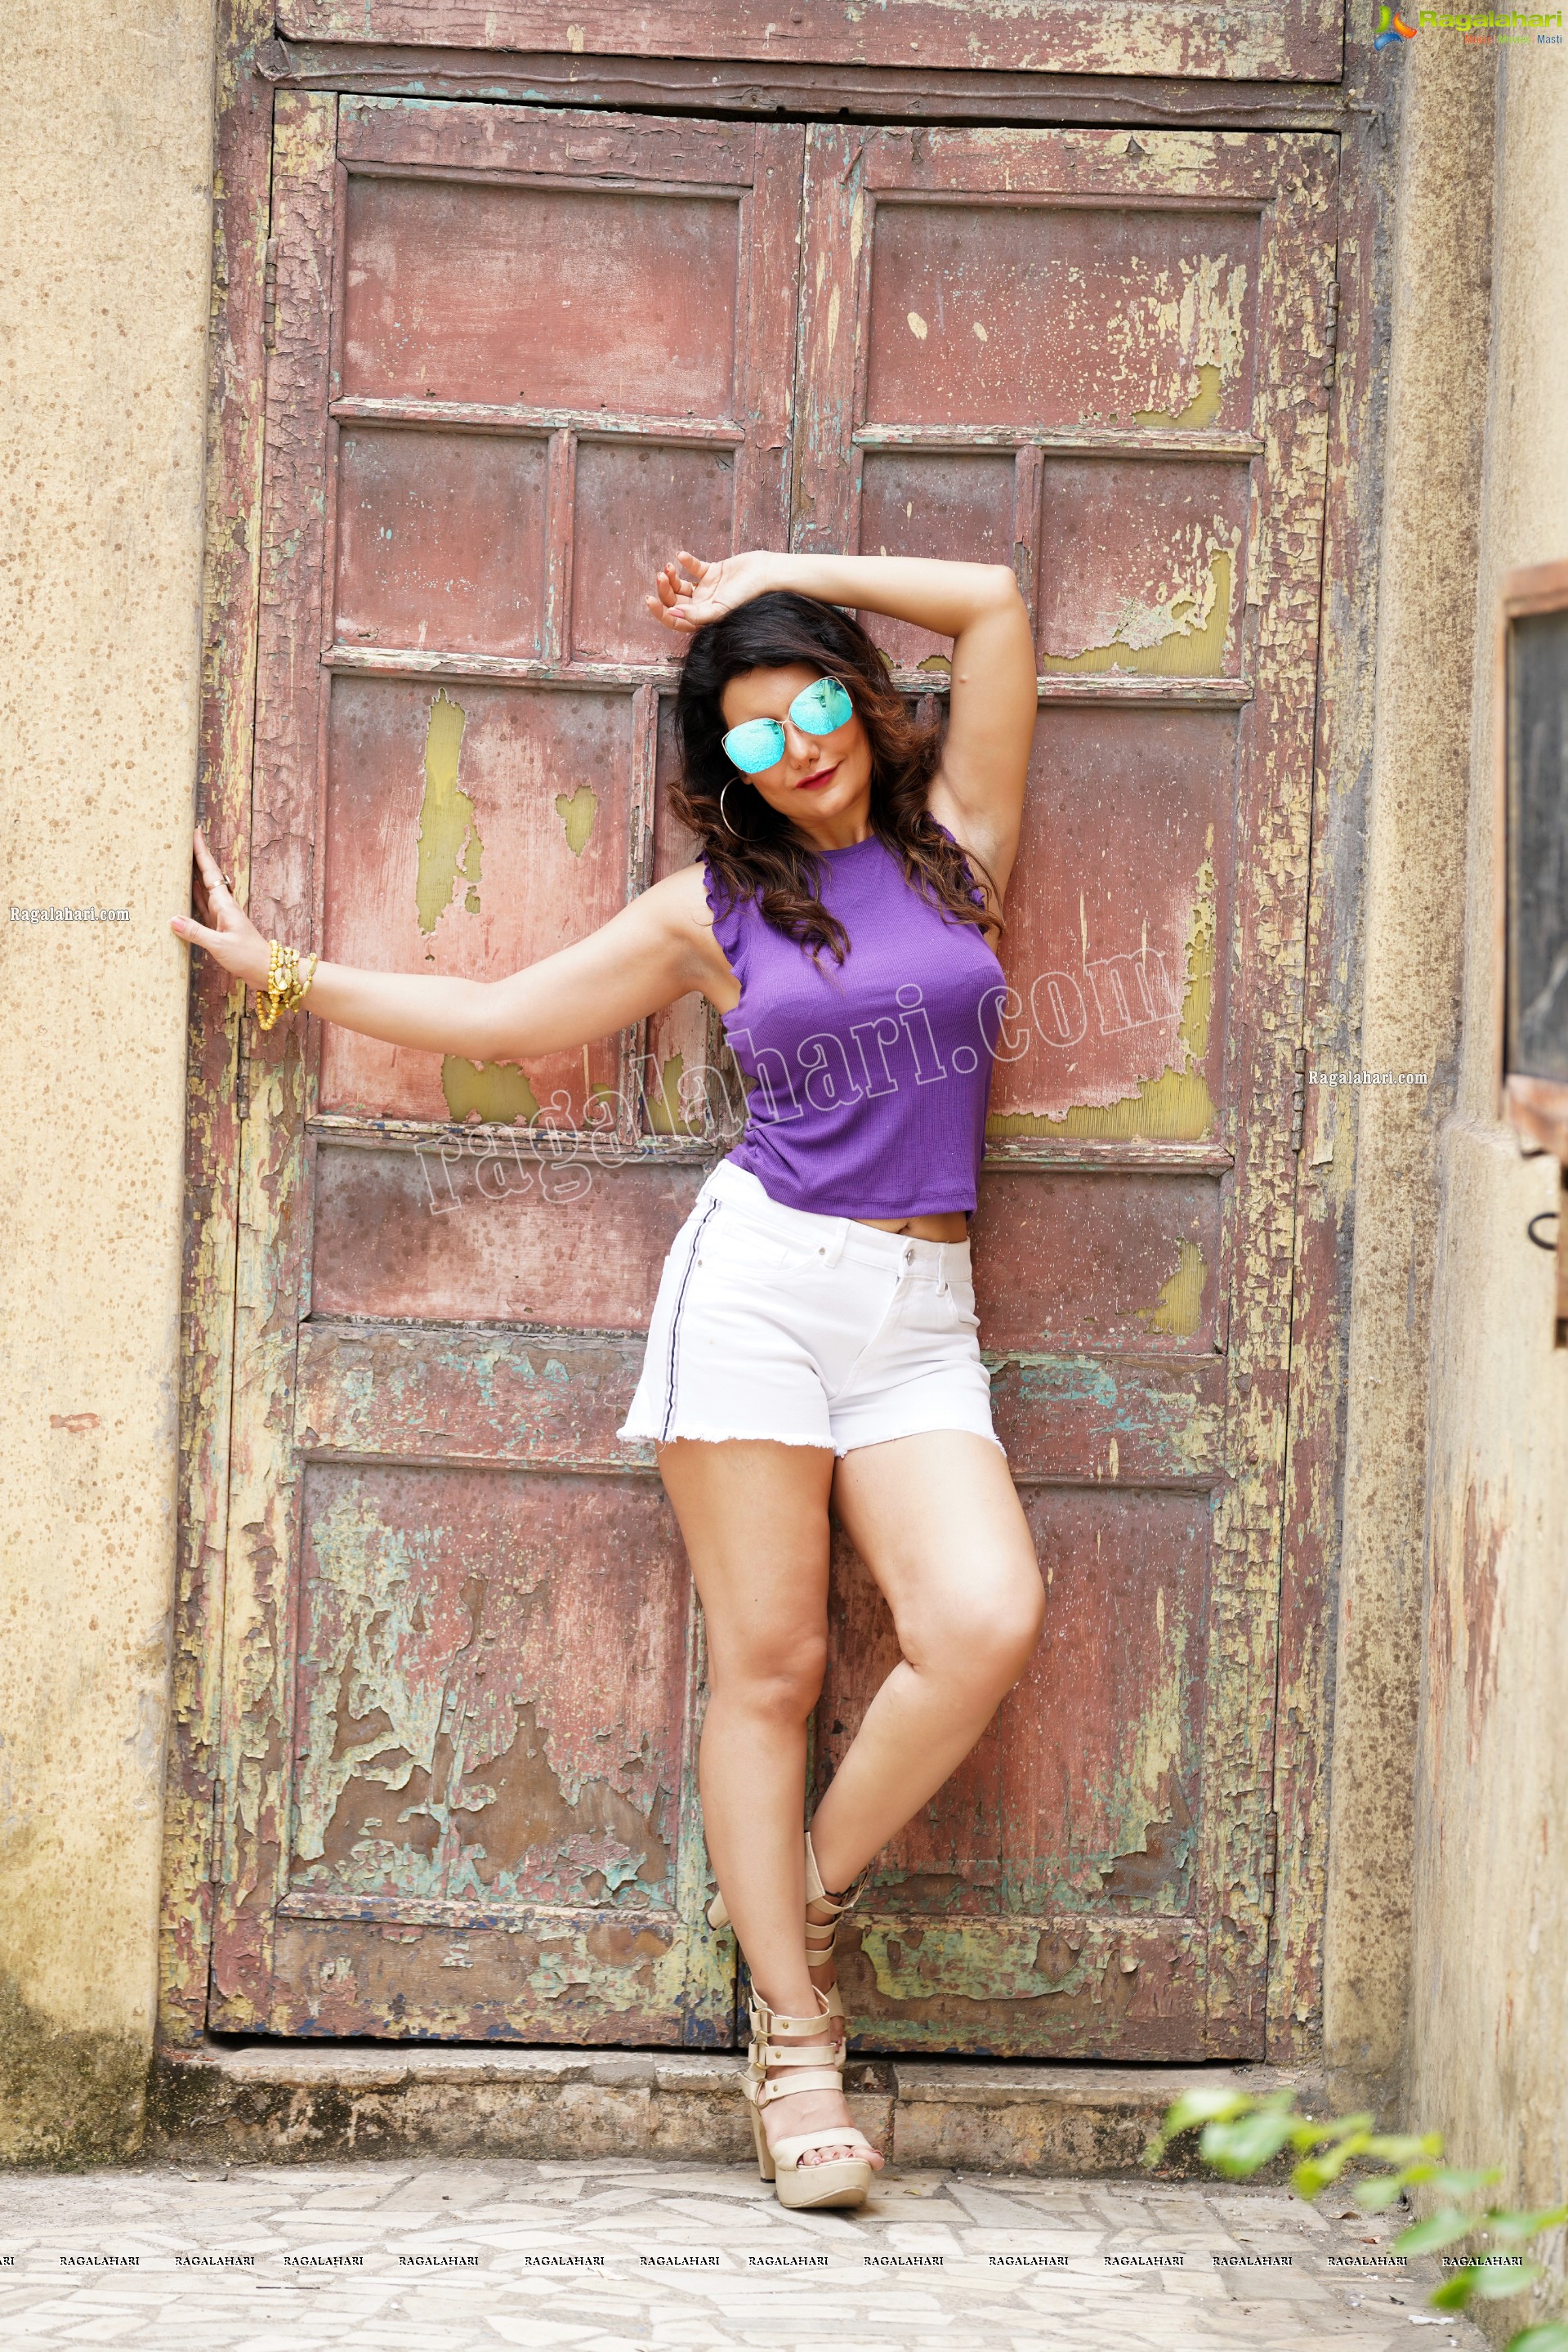 Nisha Singh Rajput in Purple Crop Top and White Shorts, Exclusive Photoshoot